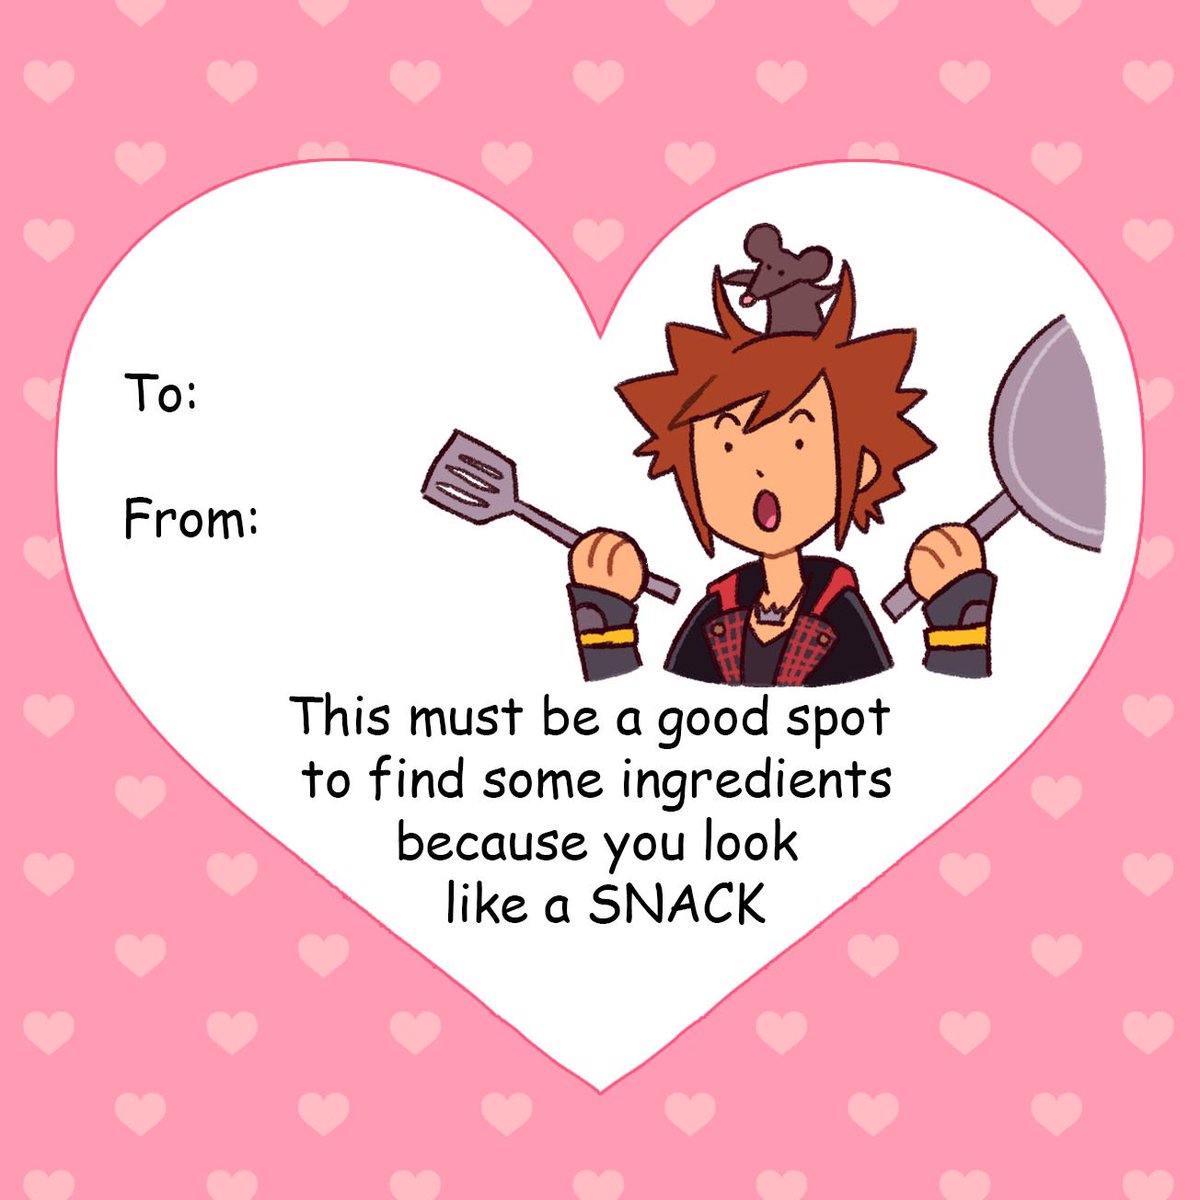 ??HEY FRIENDS!! i made some KINGDOM HEARTS VALENTINES!!?
you can get these (and more) here: https://t.co/OhsONyXesh
rts appreciated! 